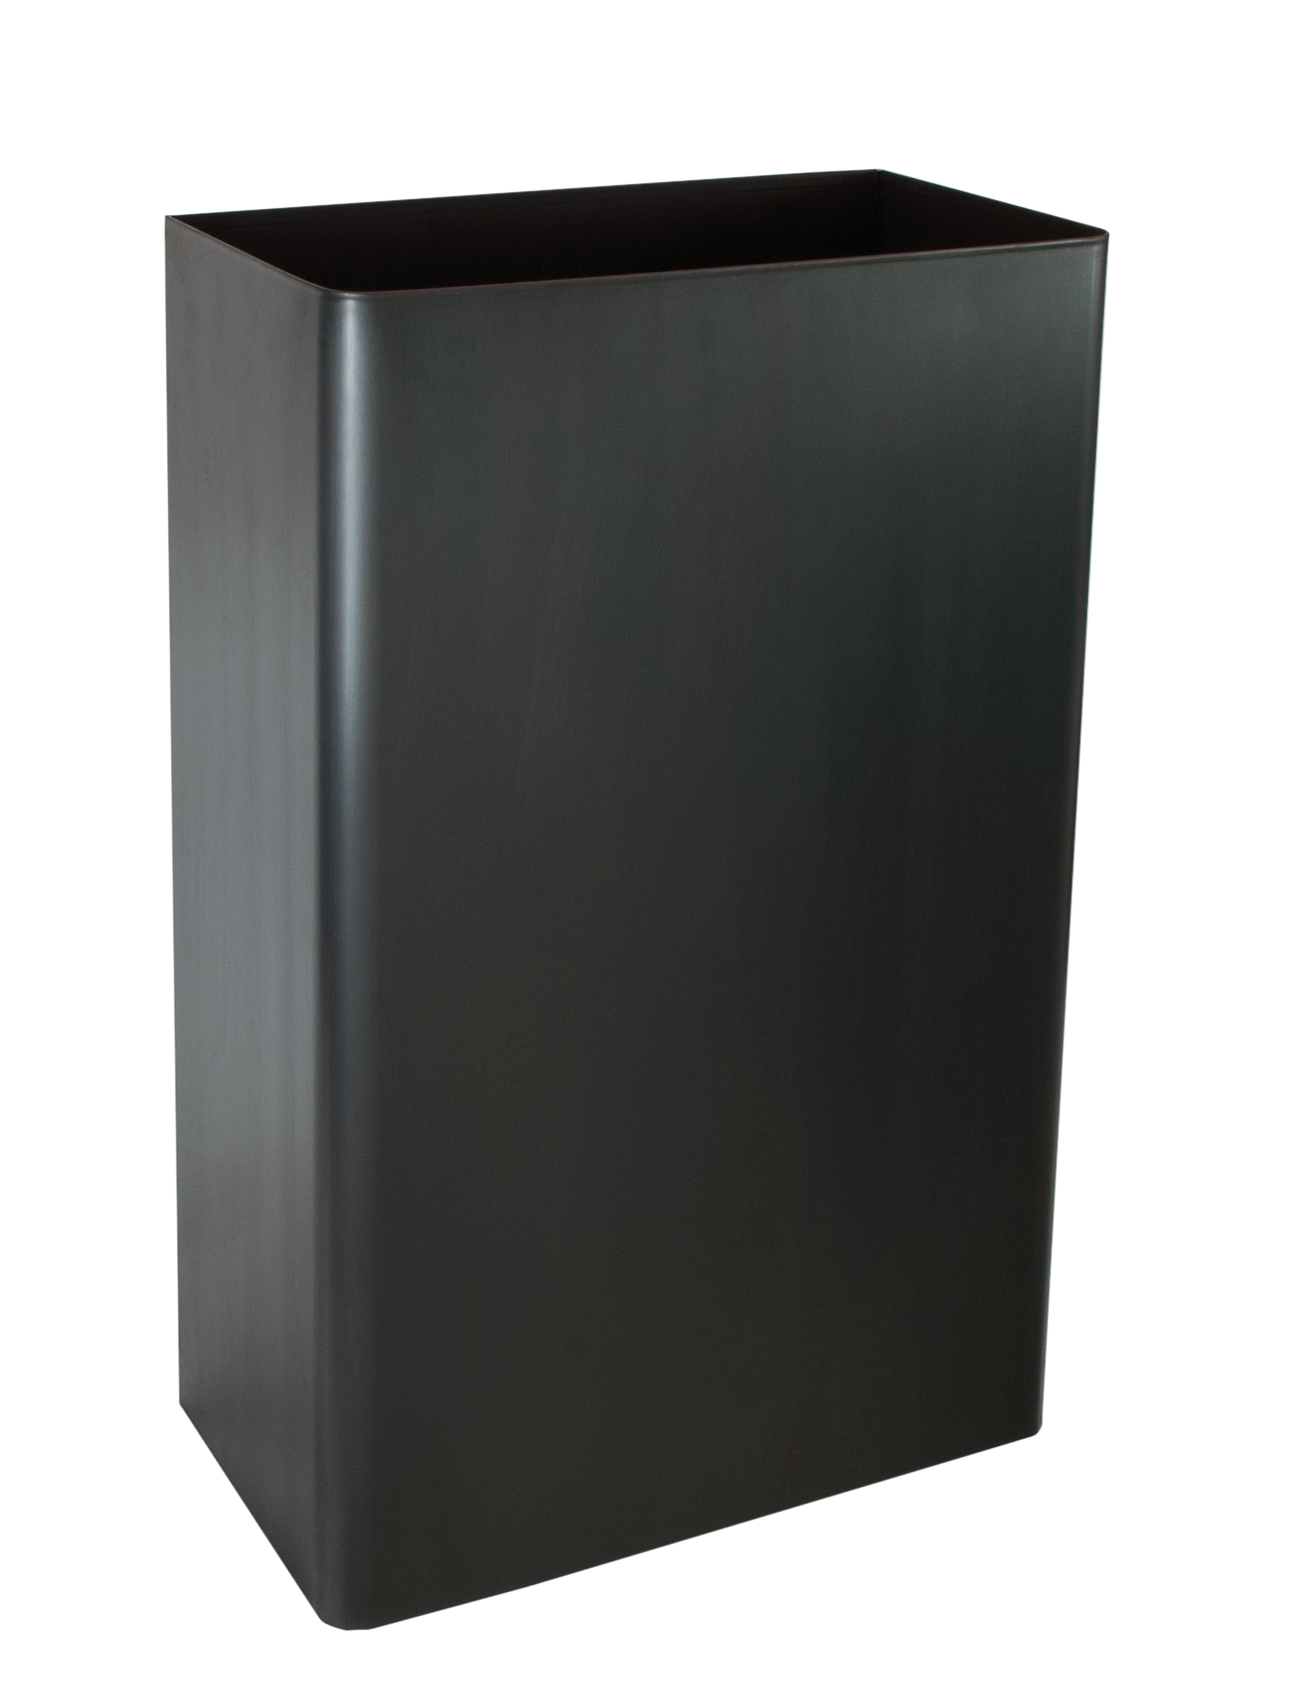 SWB-9 Surface Mounted Waste Basket In Oil Rubbed Bronze